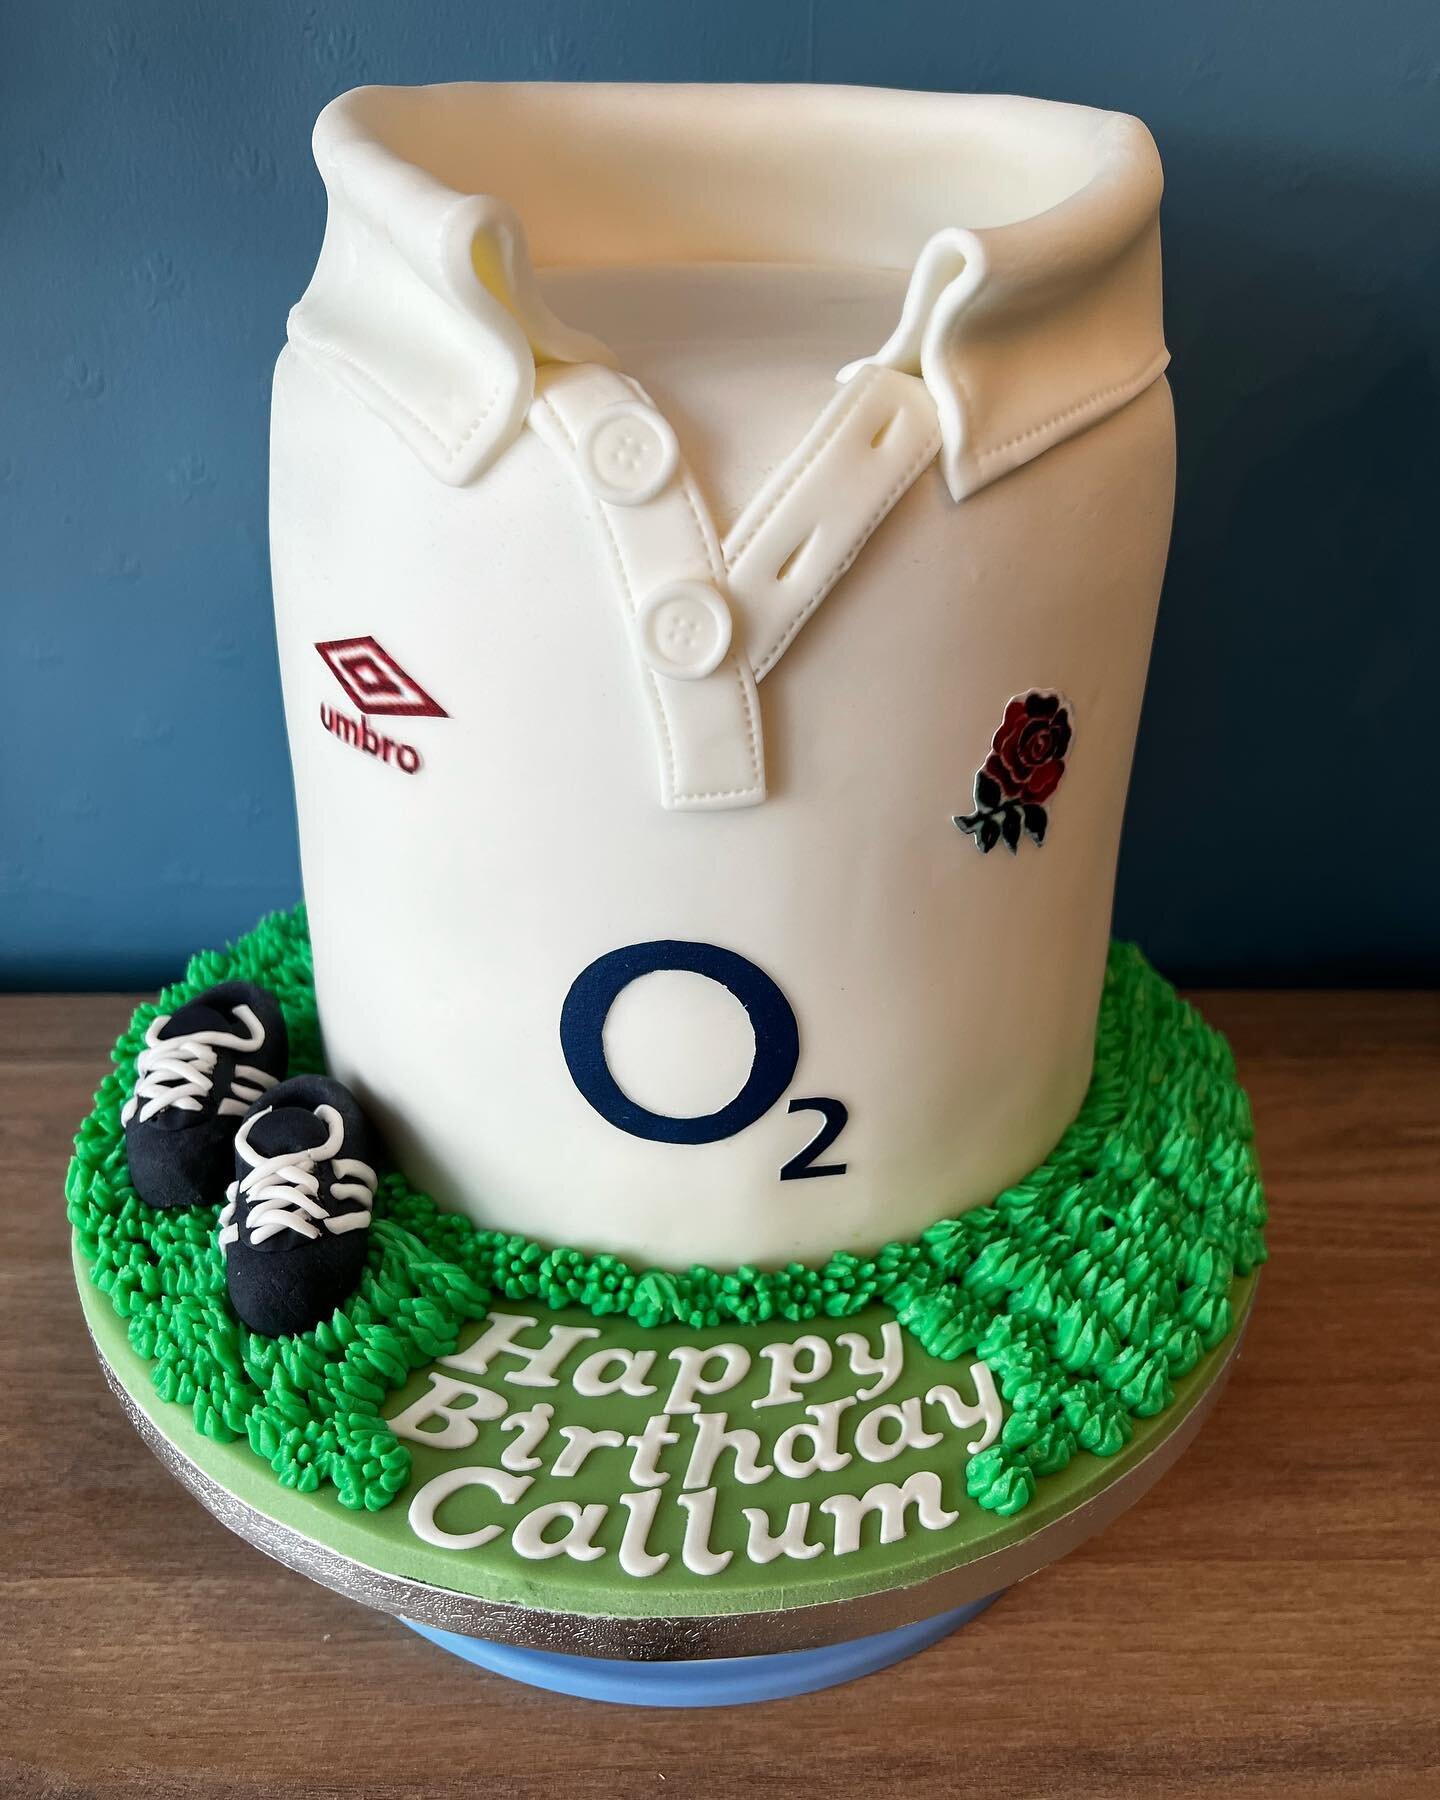 Calum had this rugby shirt chocolate cake with Biscoff filling.  Hope you had a great birthday Calum. Xx